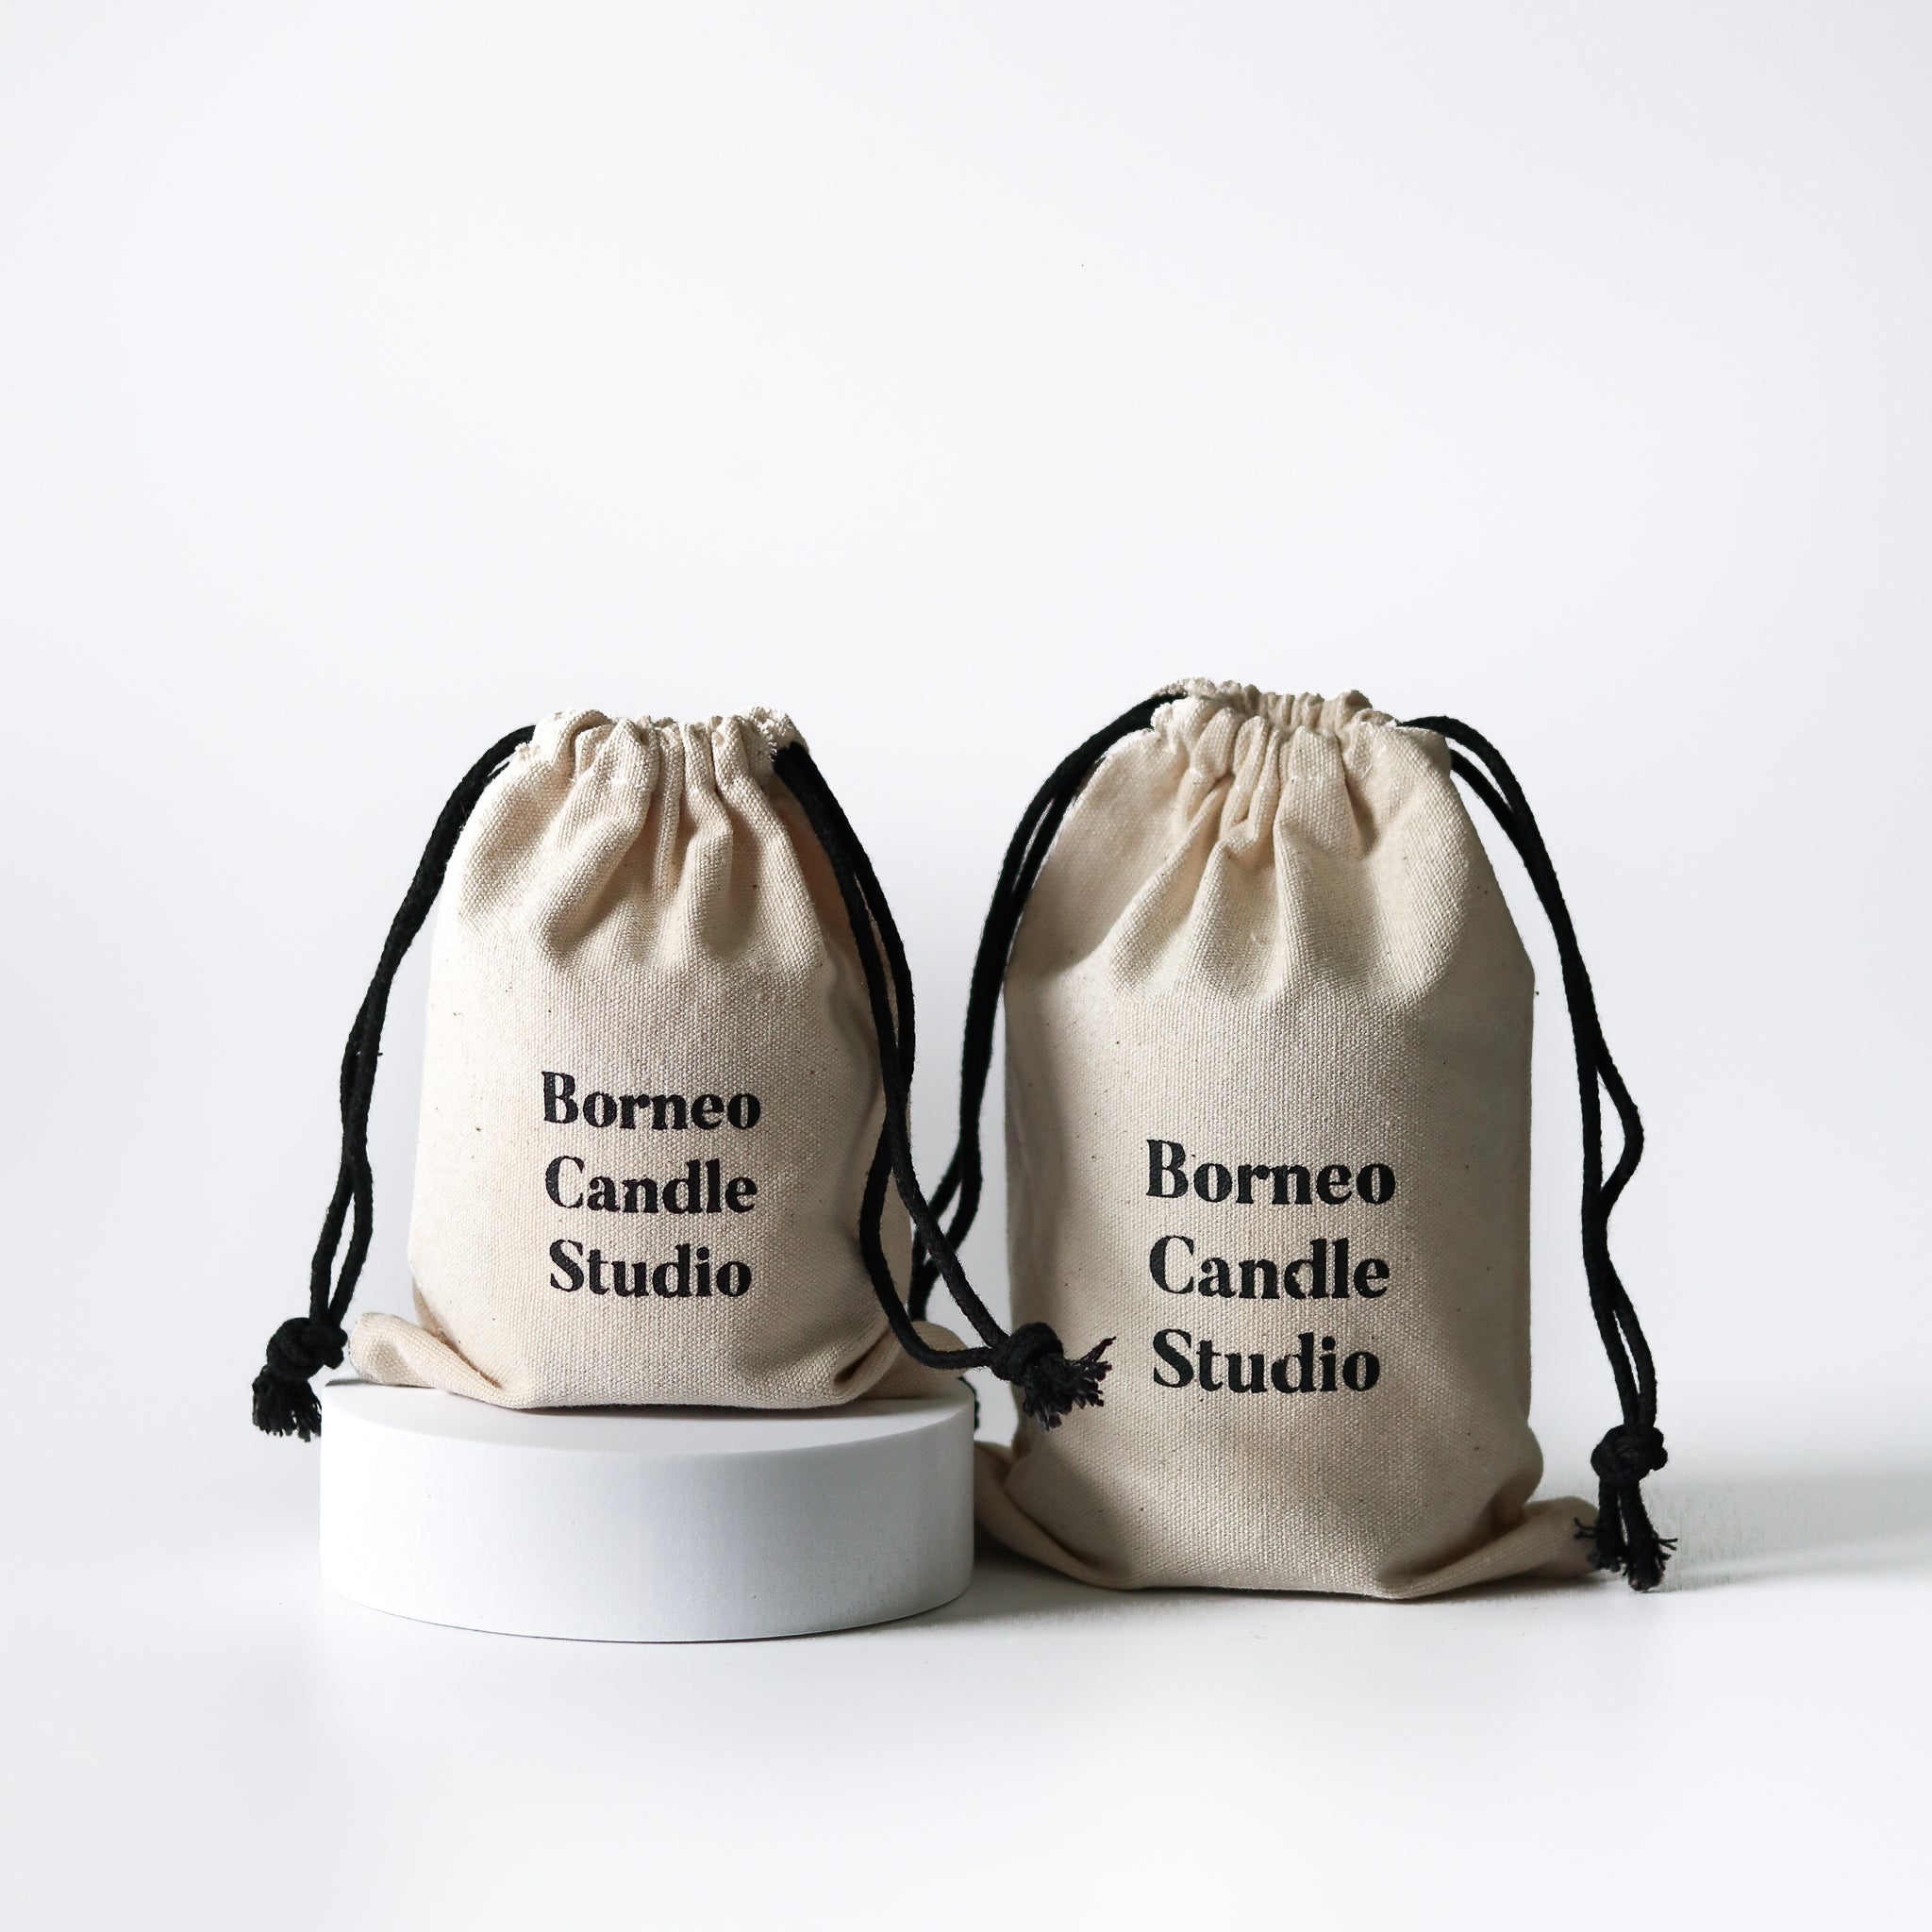 Scented candle packaging with reusable drawstring cotton pouch by Borneo Candle Studio